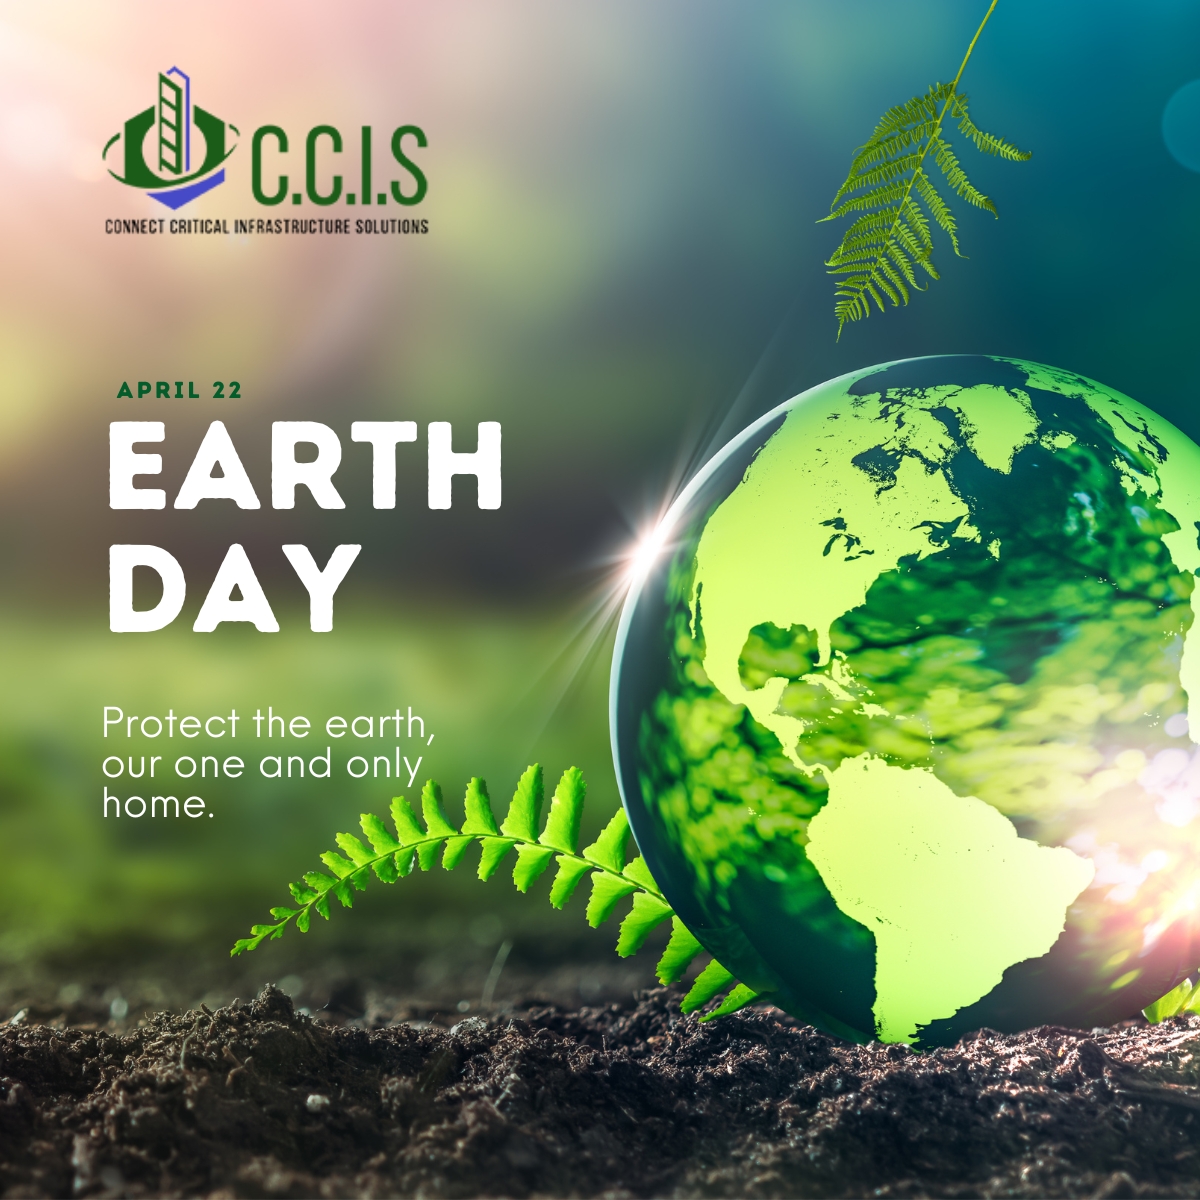 Happy Earth Day! let's take a breath and appreciate the planet we call home.🌍 With #Uhoo, you can monitor your indoor air quality and take steps towards a cleaner, healthier environment for yourself and the Earth.
✅Visit our website: ccisja.com
#Getuhoo
#CCIS